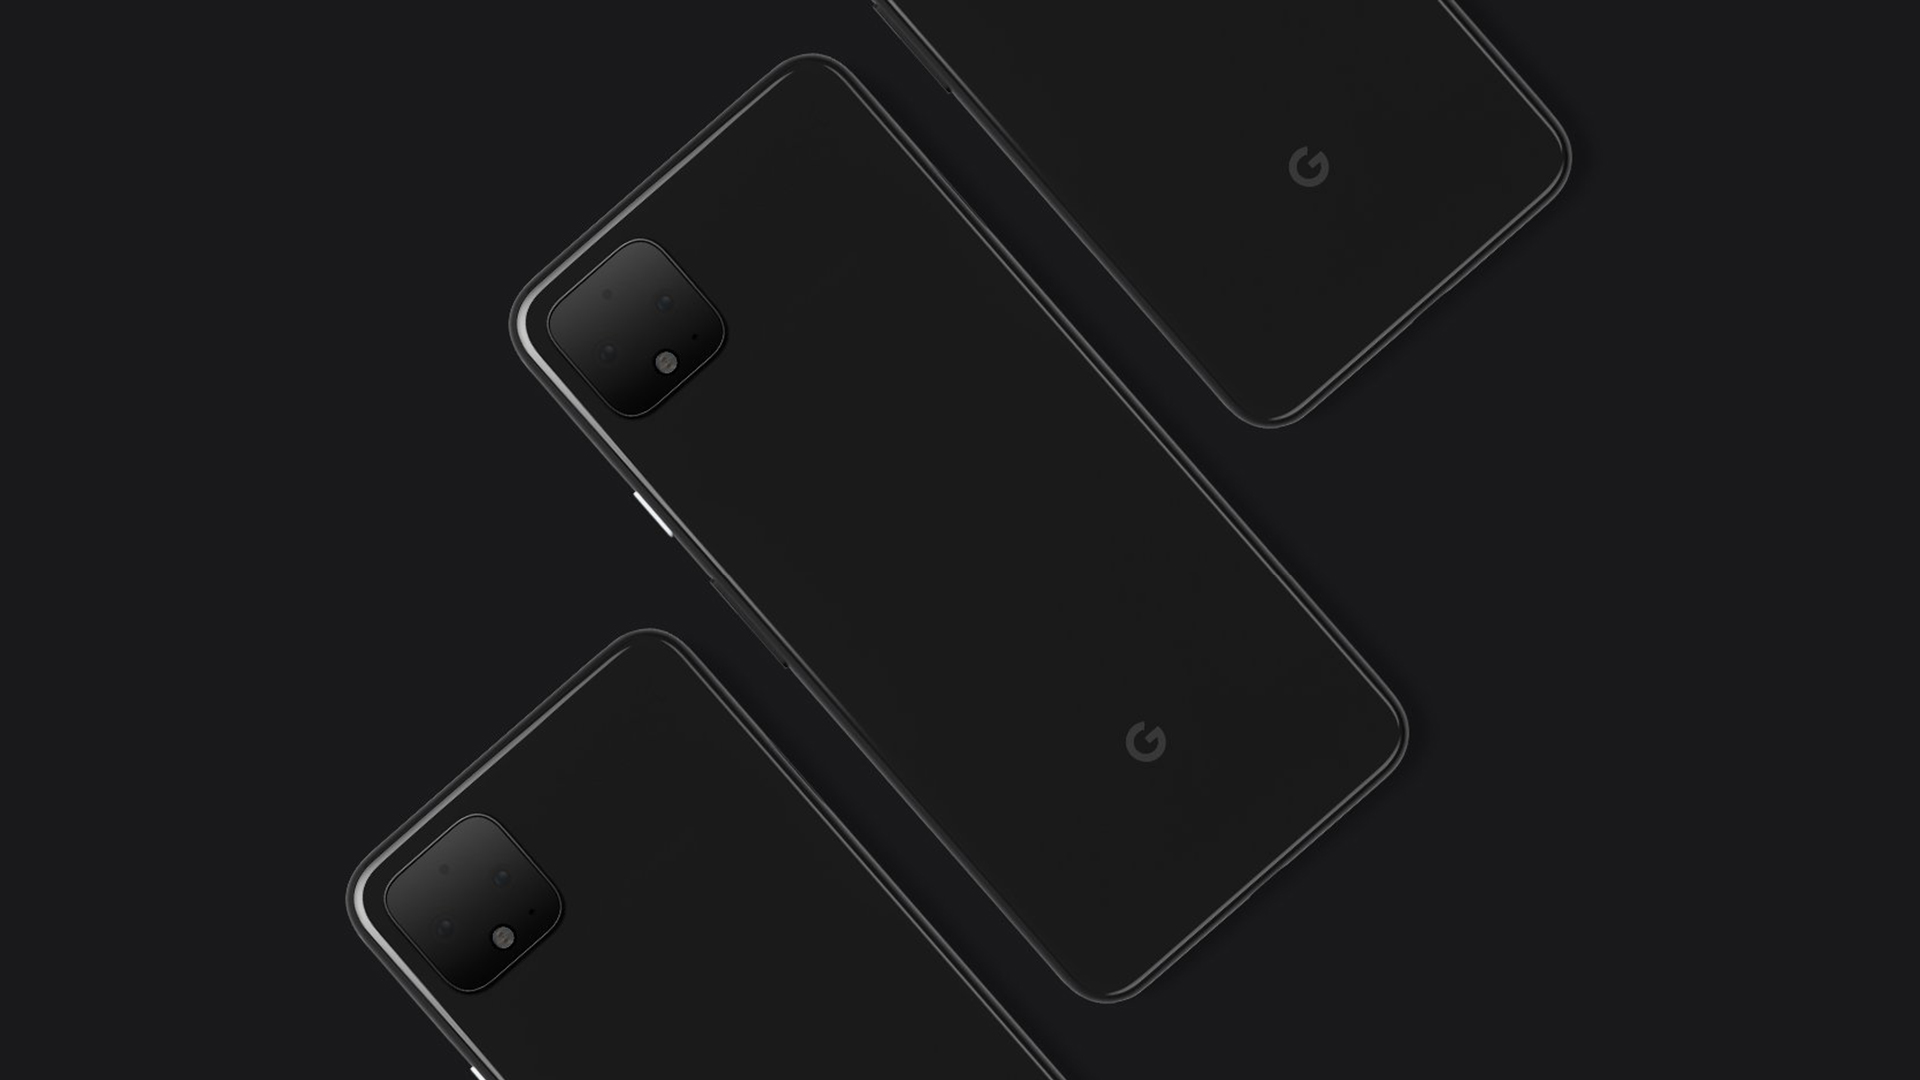 Monitoring Call Minutes On Google Pixel 4: A User’s Guide